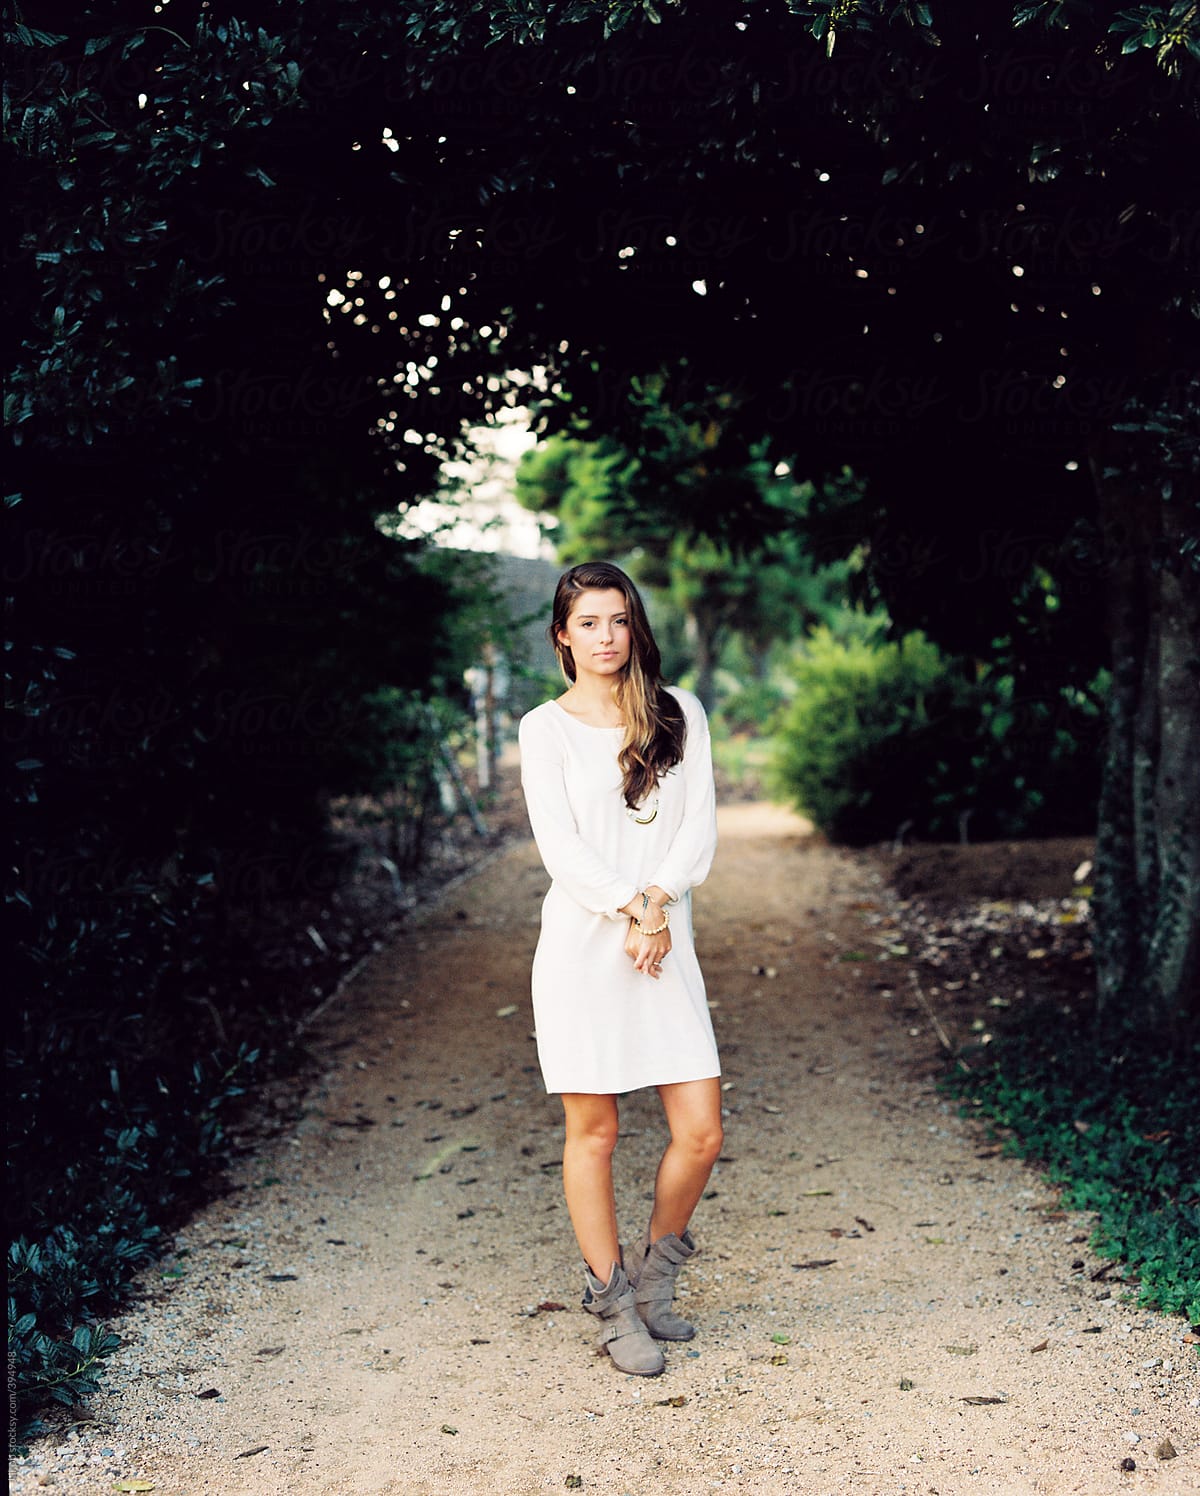 Beautiful girl in a sweater dress standing outside on a gravel walkway